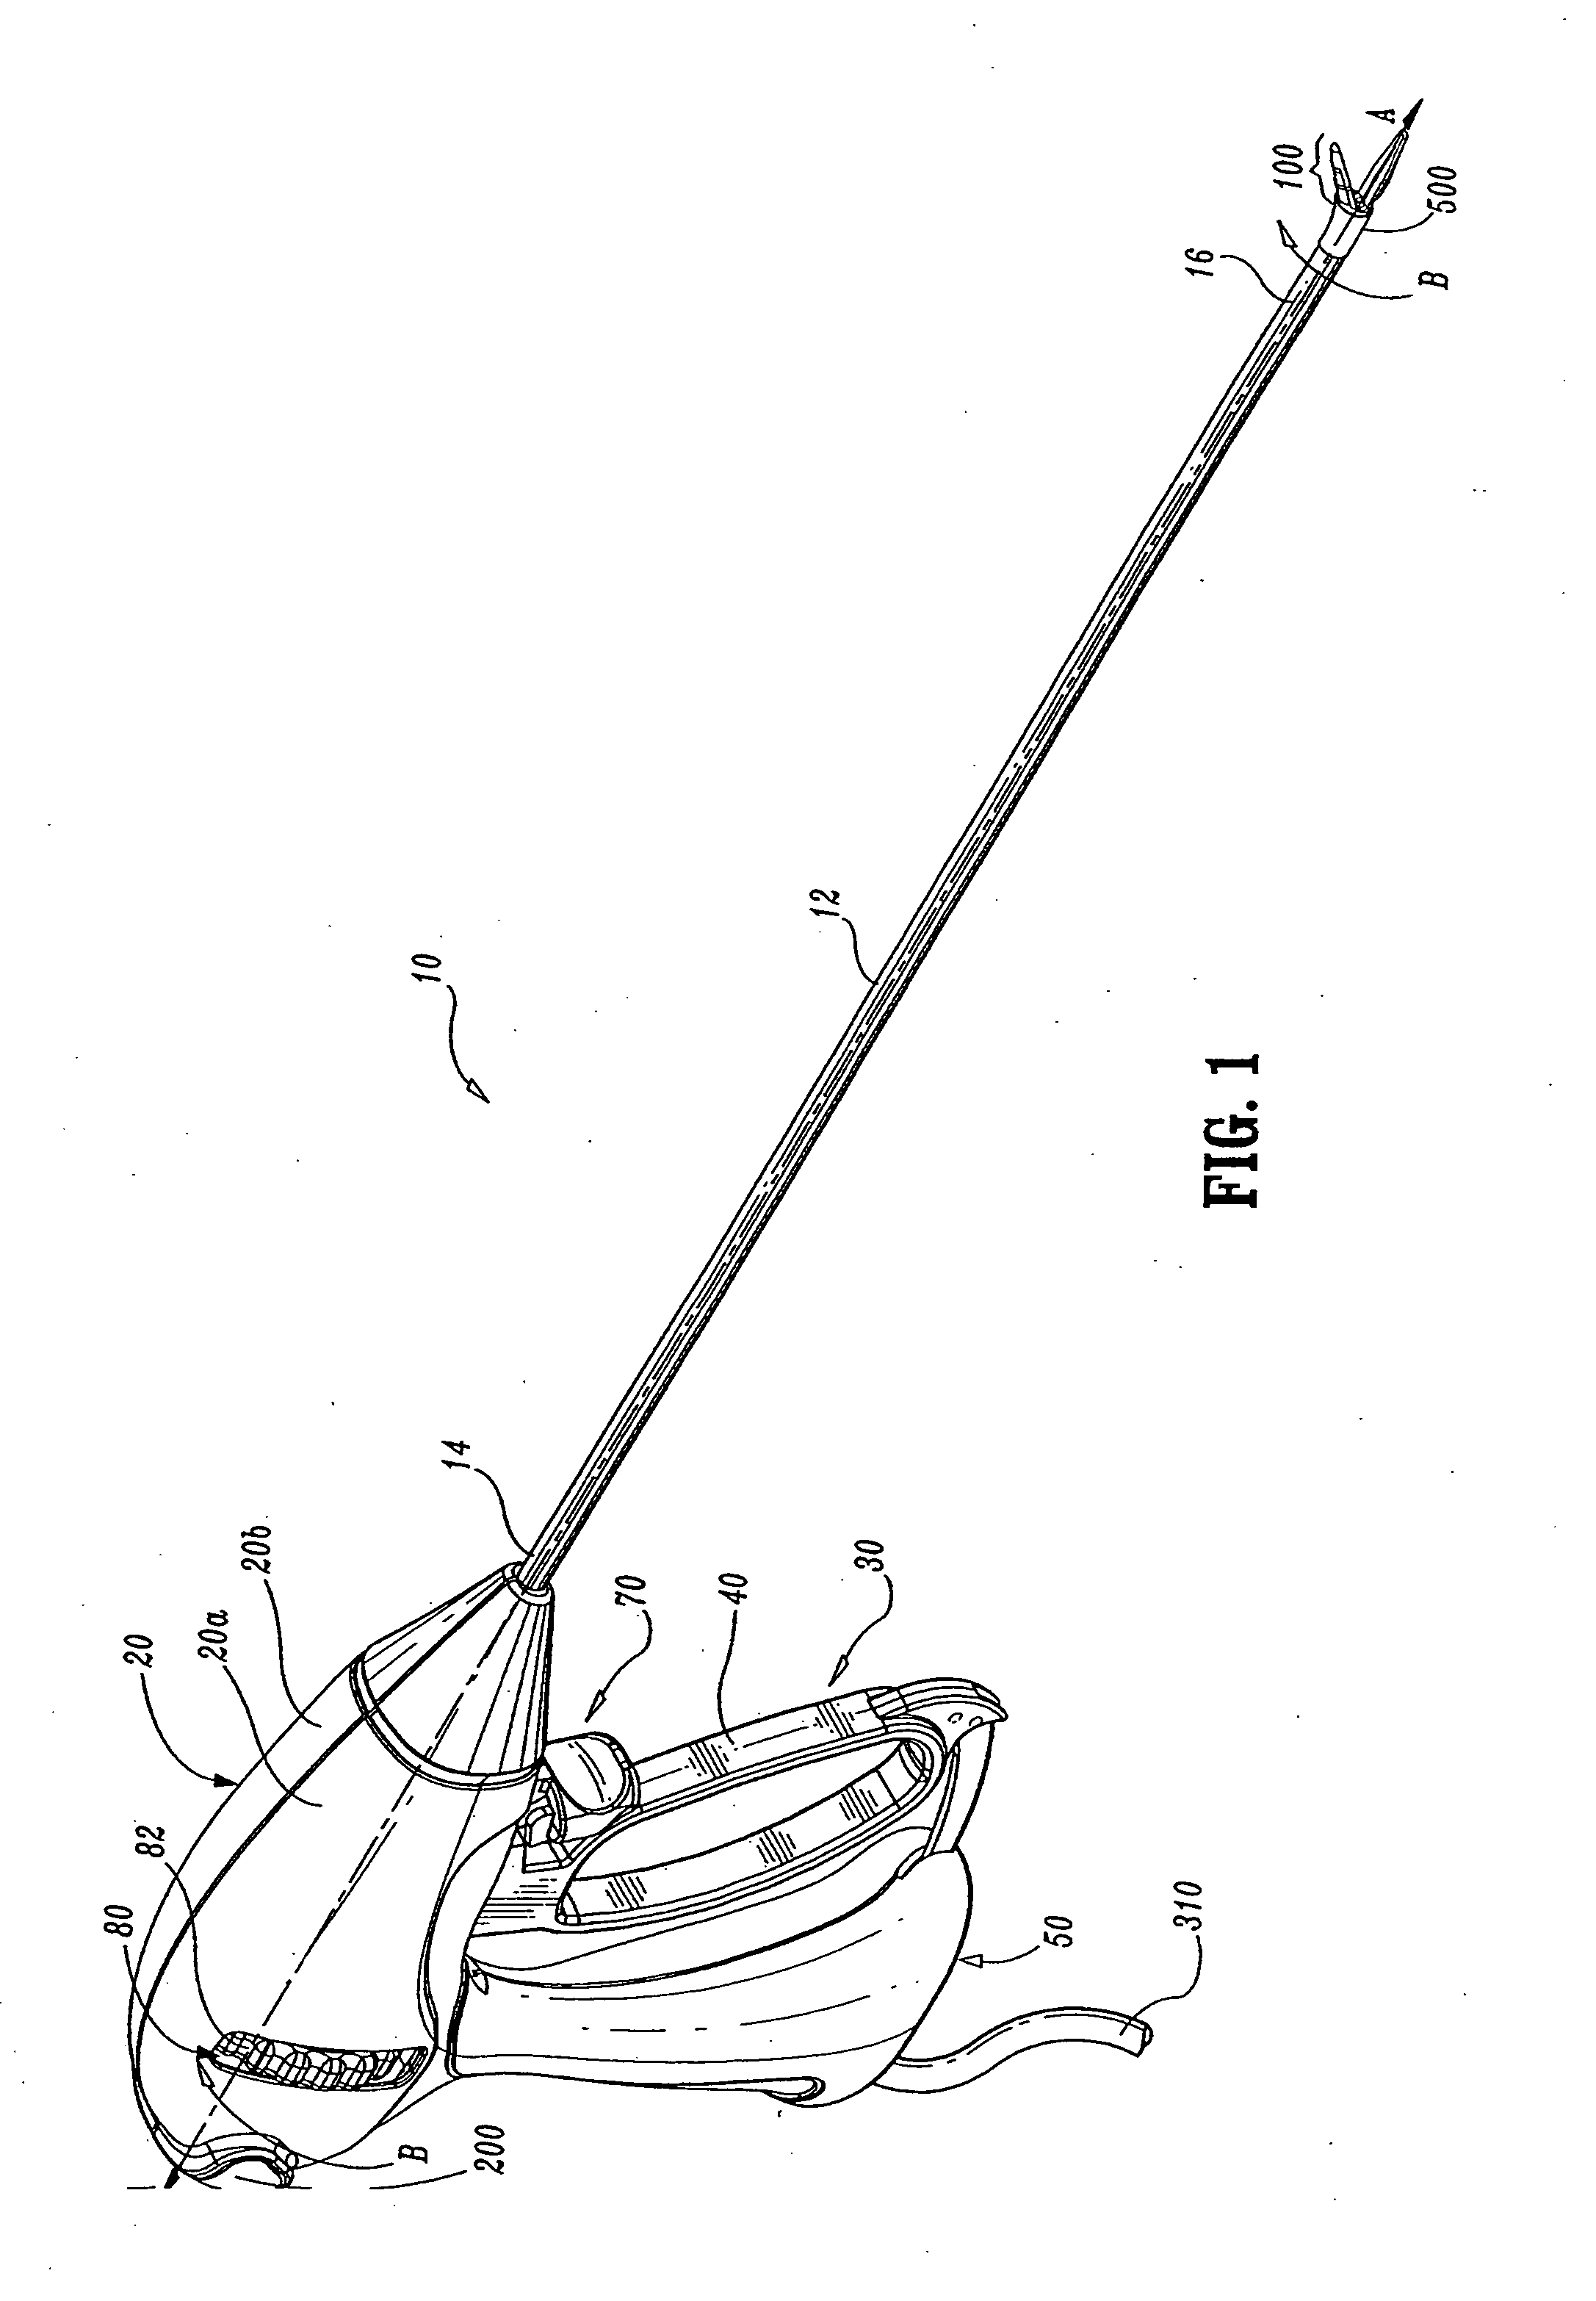 Insulating boot for electrosurgical forceps